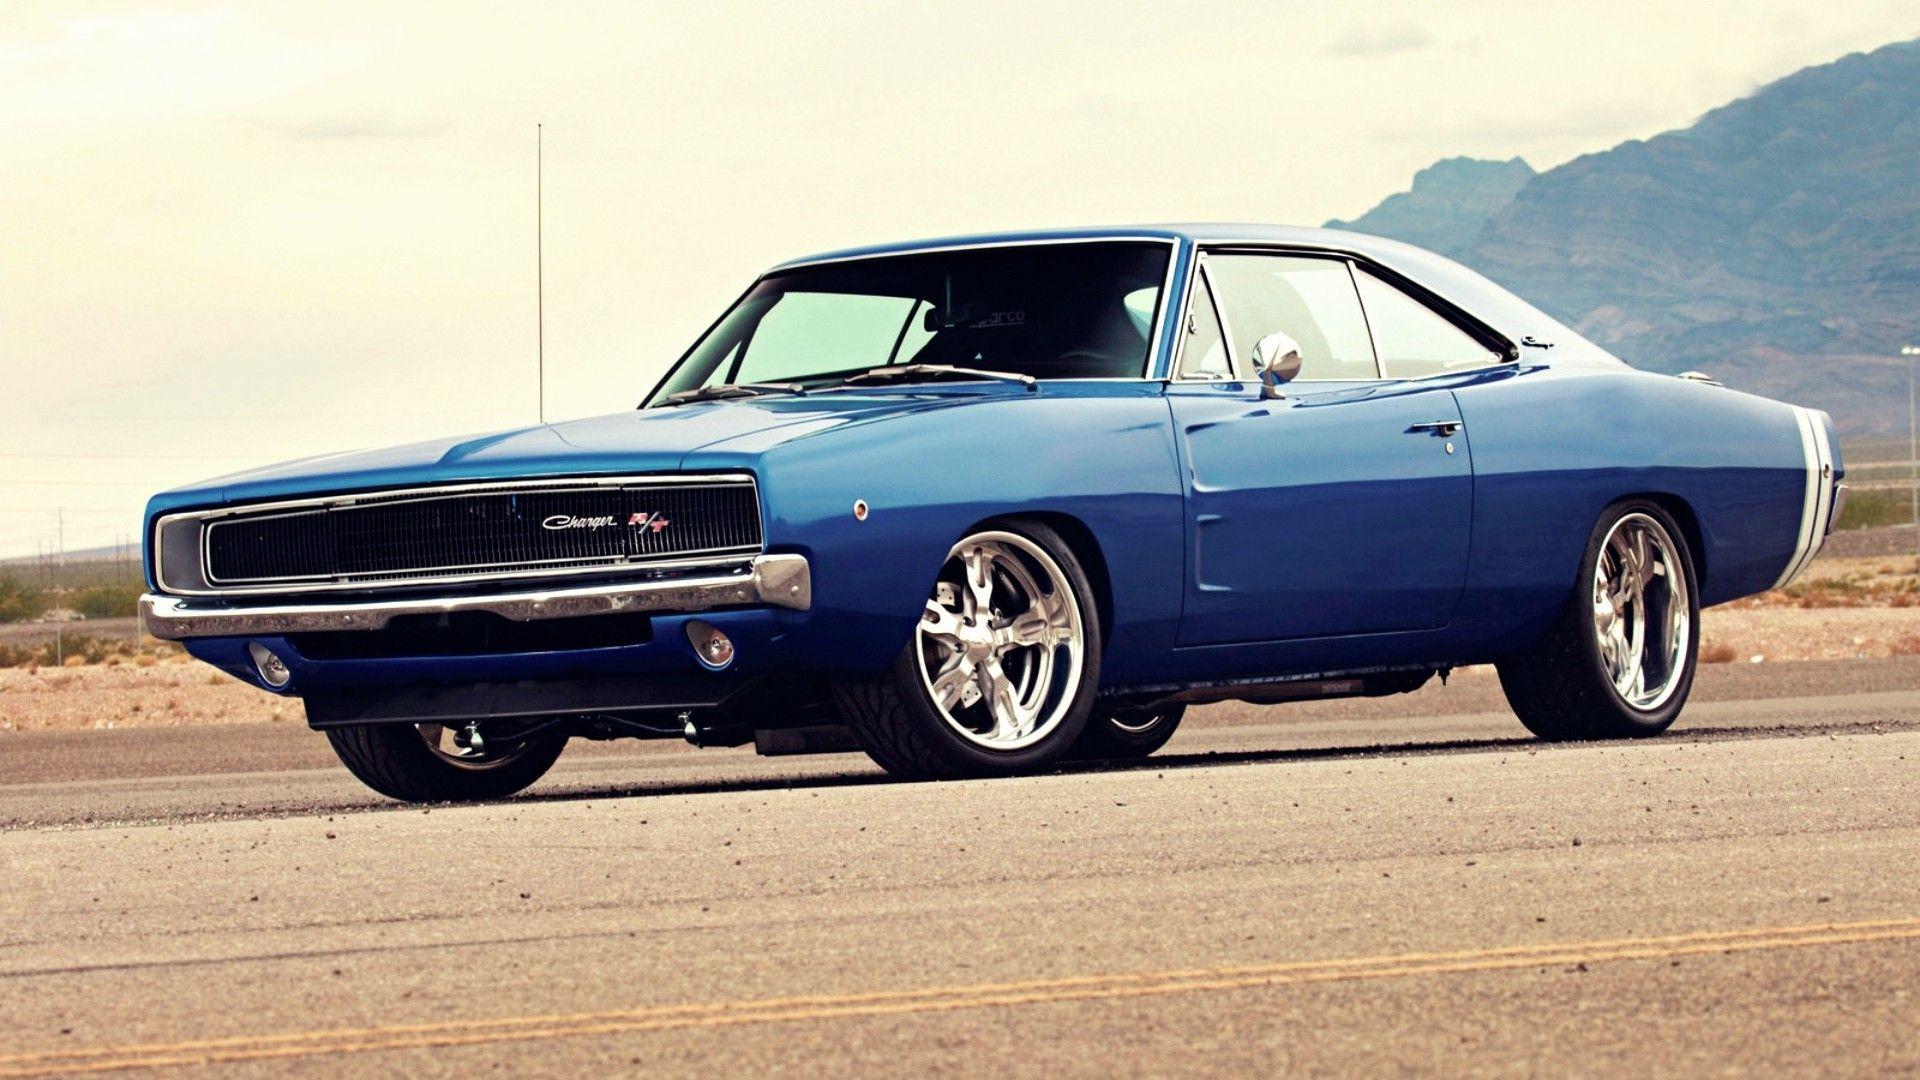 Dodge Charger Wallpaper, 40 1970 Dodge Charger Android